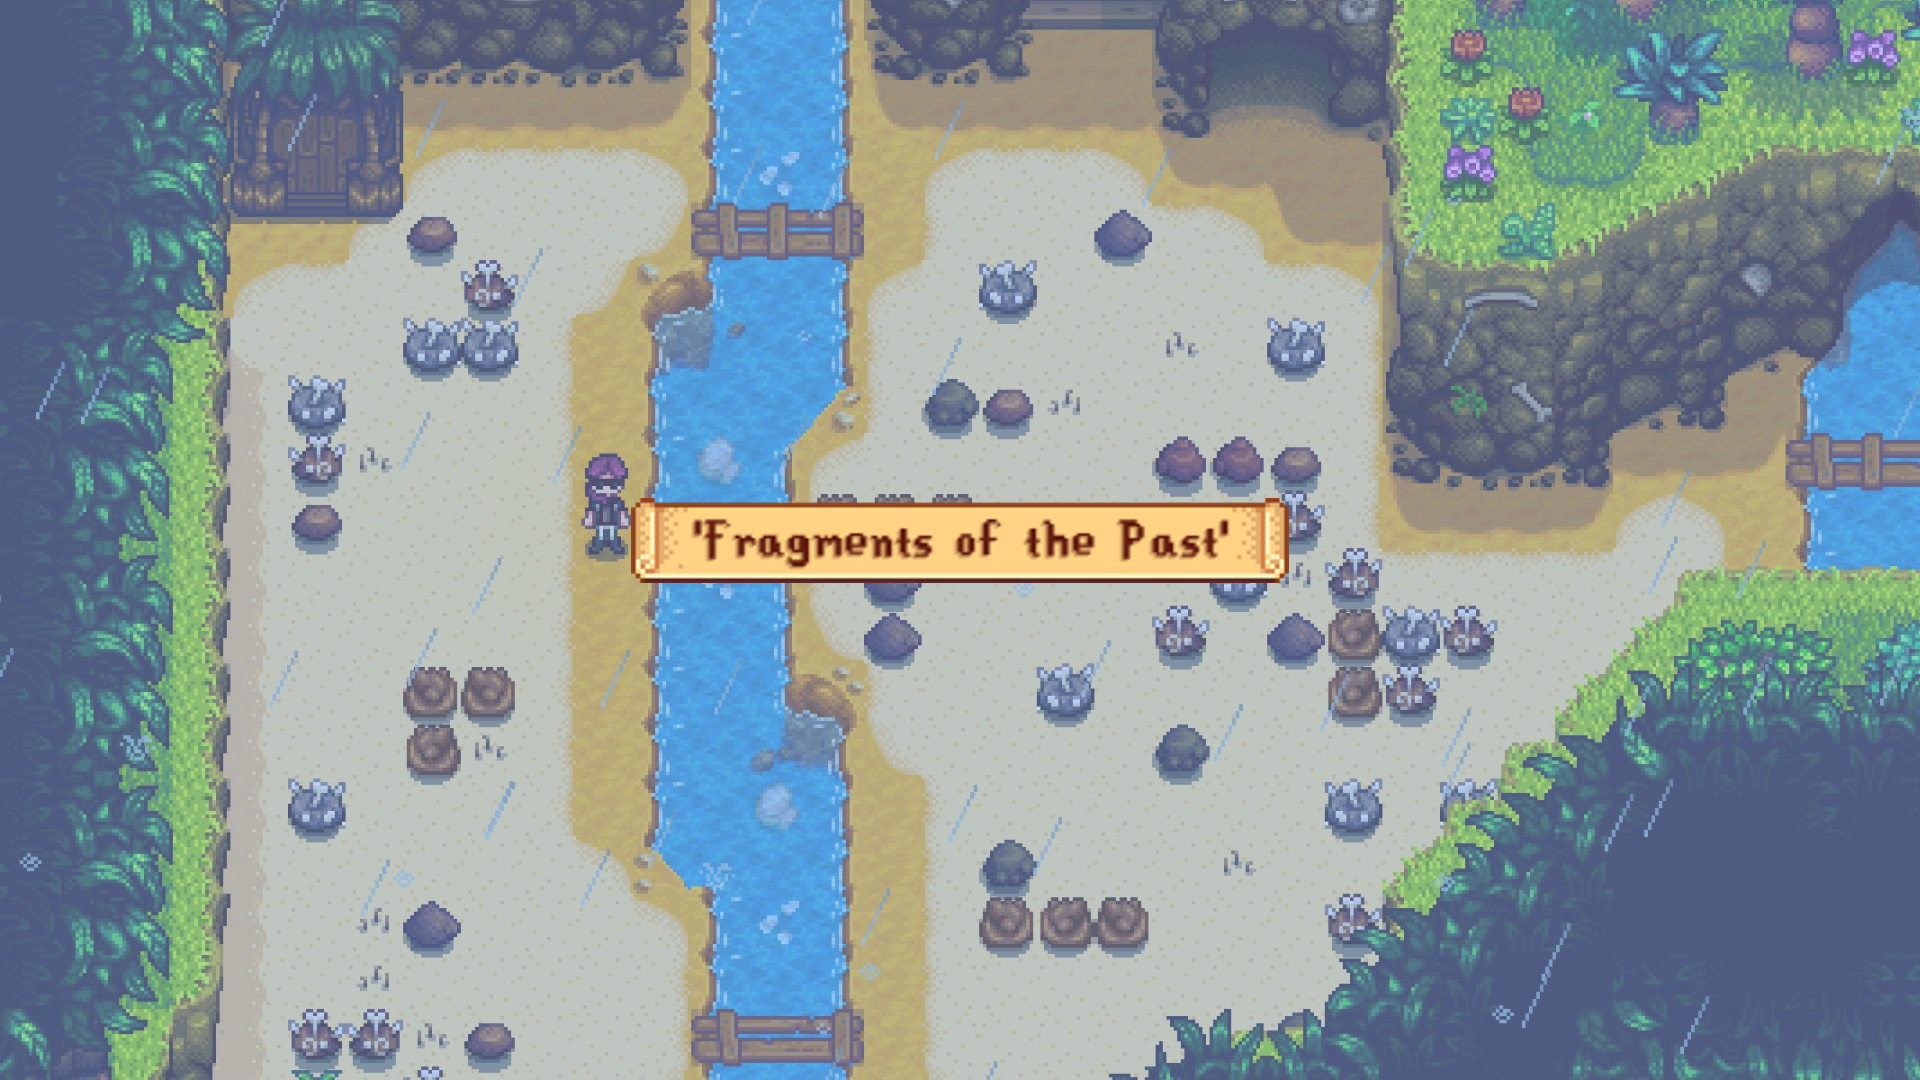 How to Complete the Fragments of the Past Quest in Stardew Valley